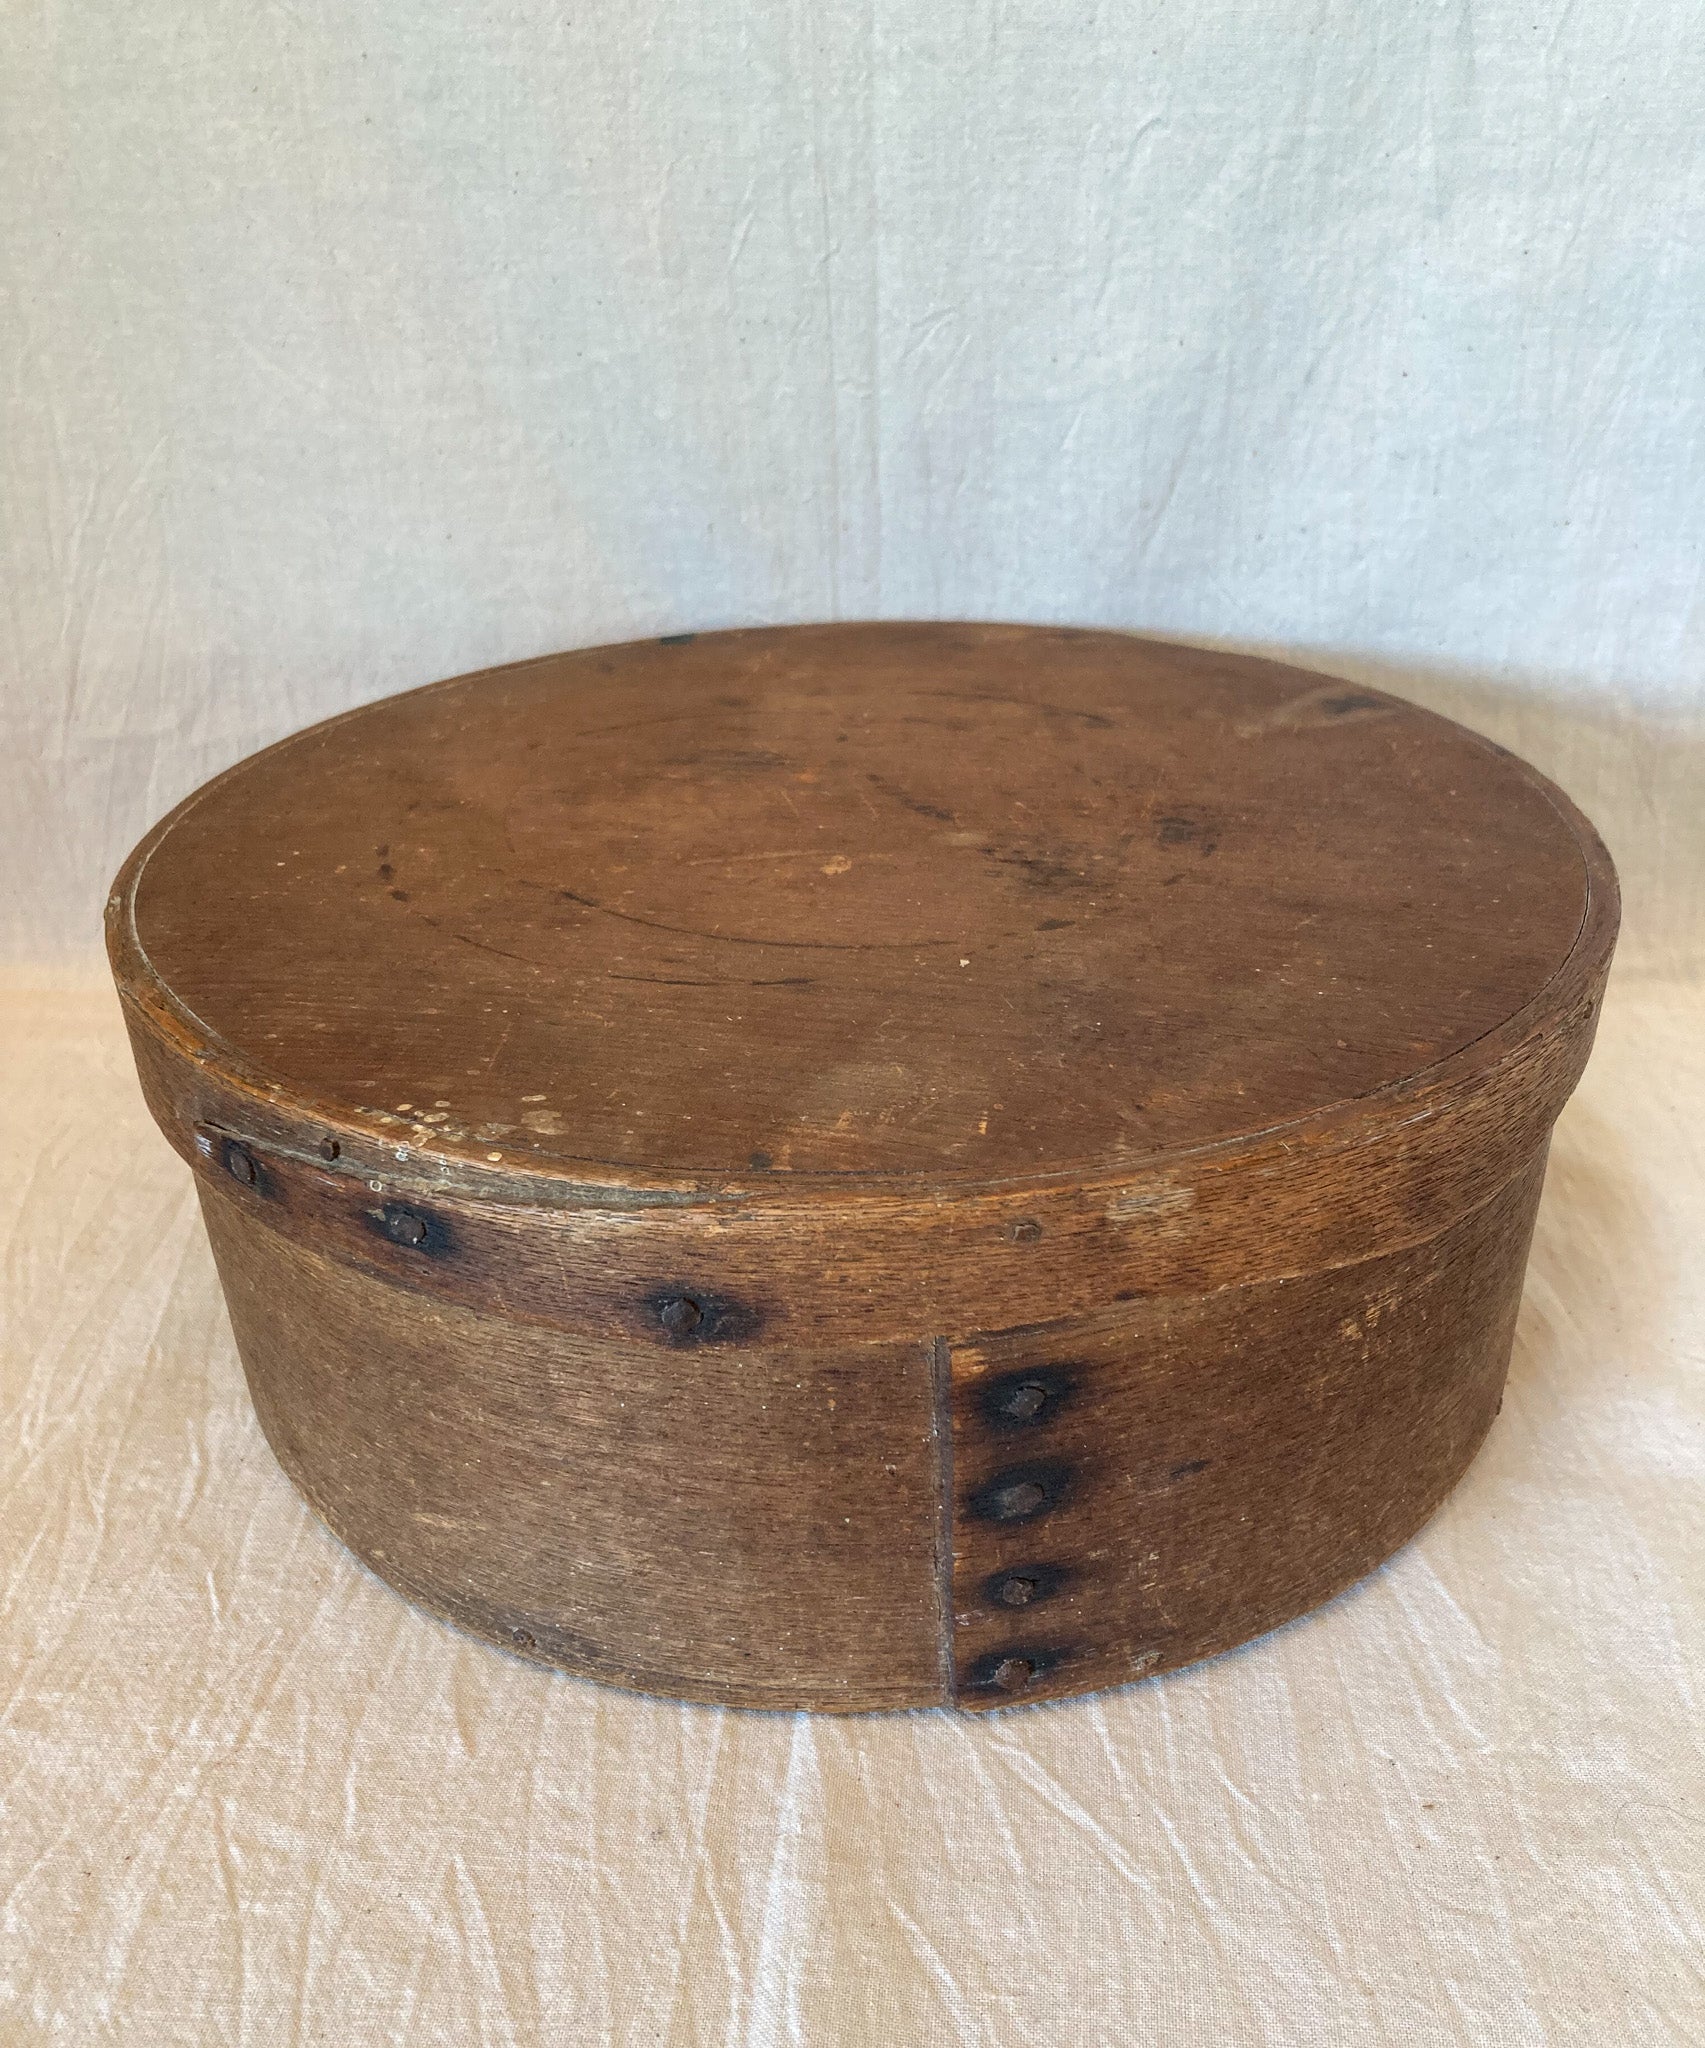 Antique Wood Sewing Box, with Center Divider and Contents from Various Eras